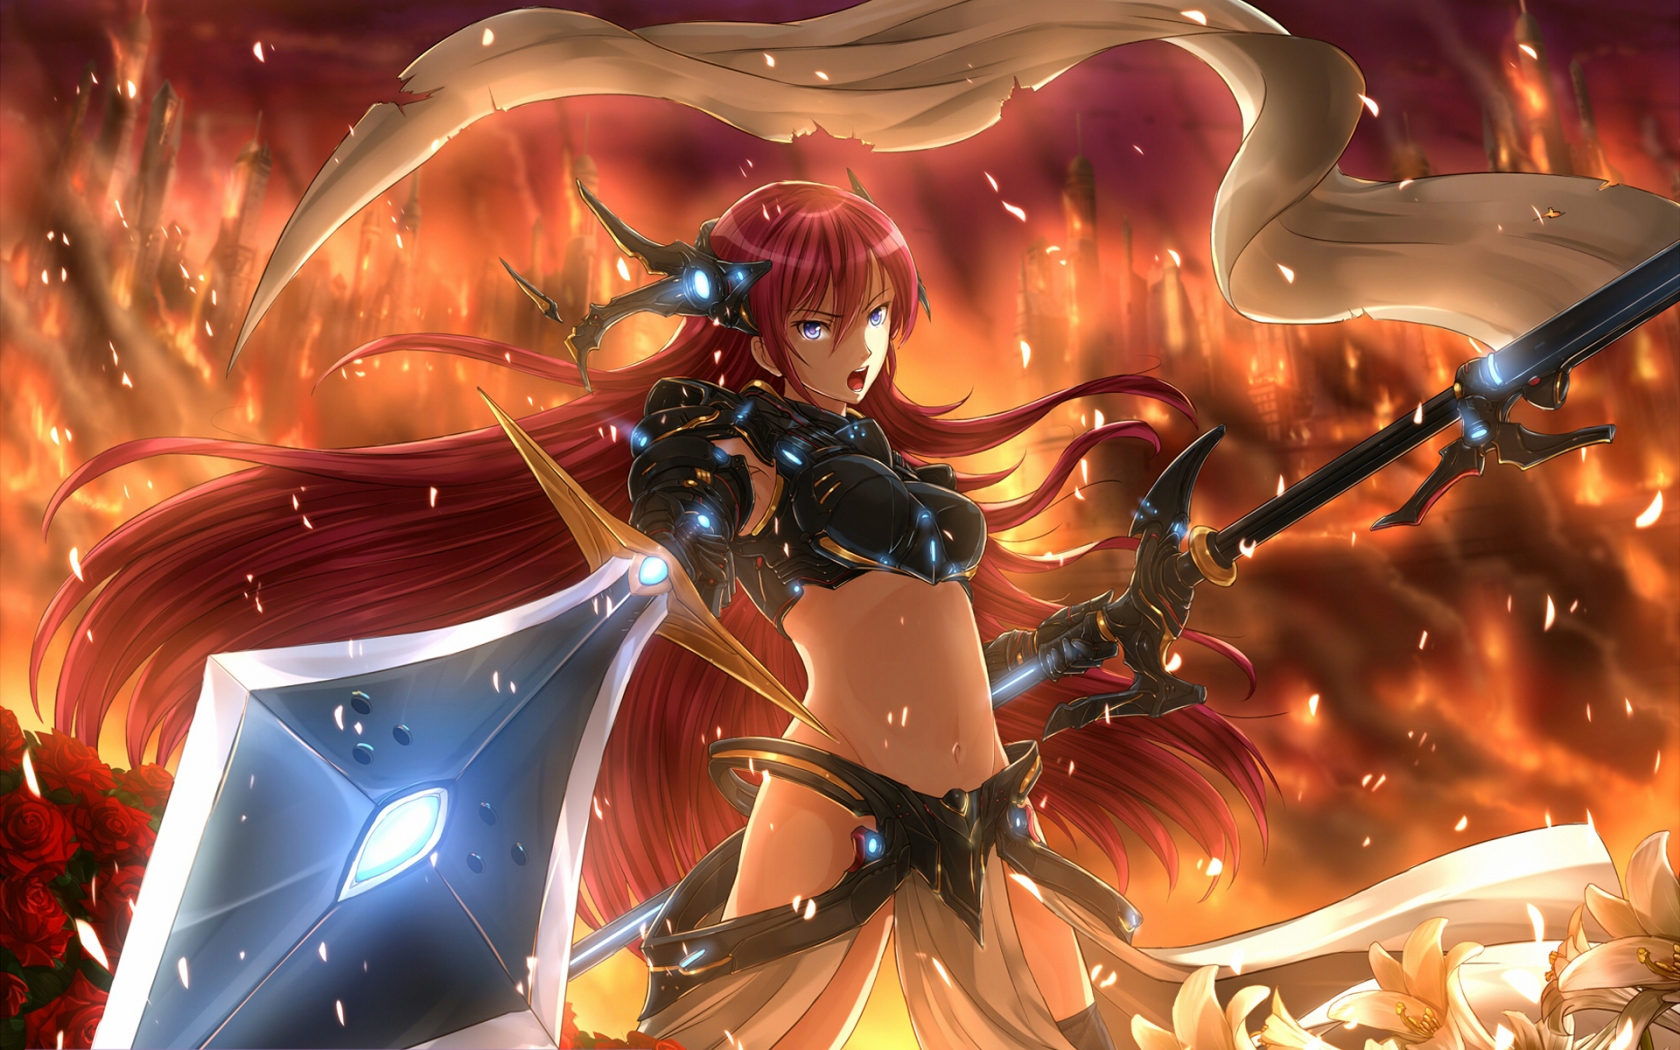 Megurine Luka in Fire for 1680 x 1050 widescreen resolution